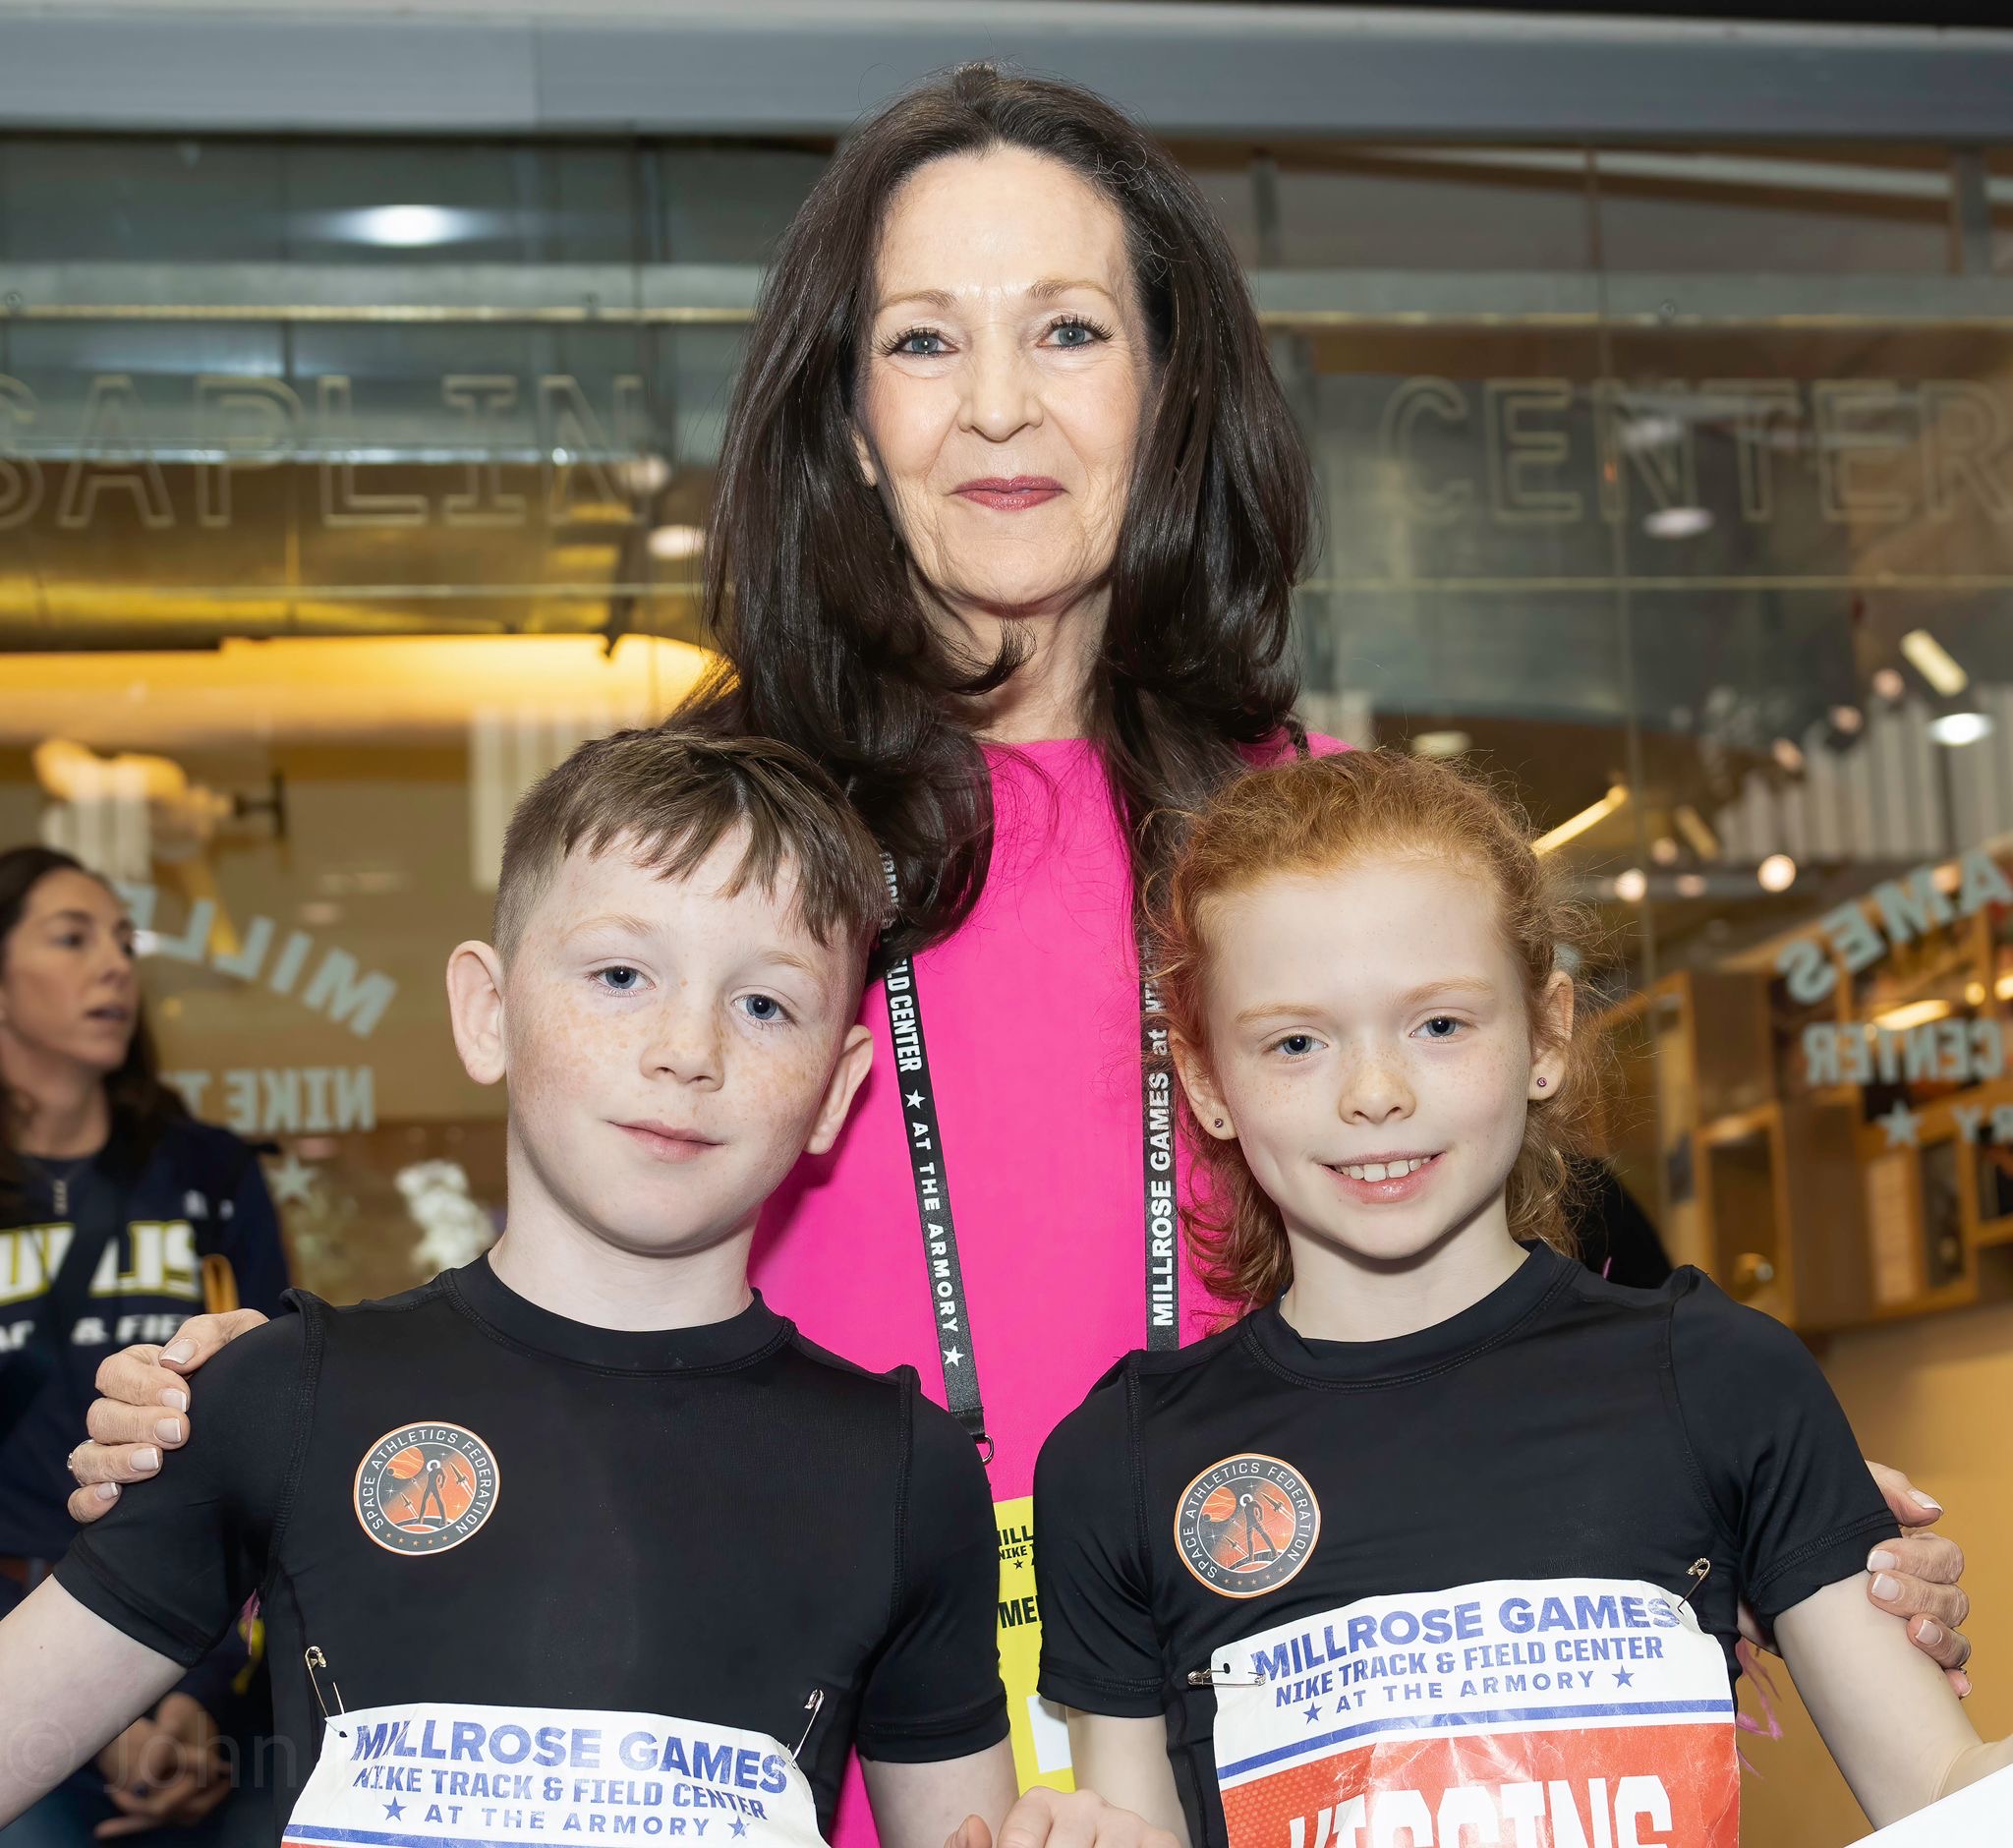 Space Athletics Federation® junior athletes take part in Millrose Games, New York